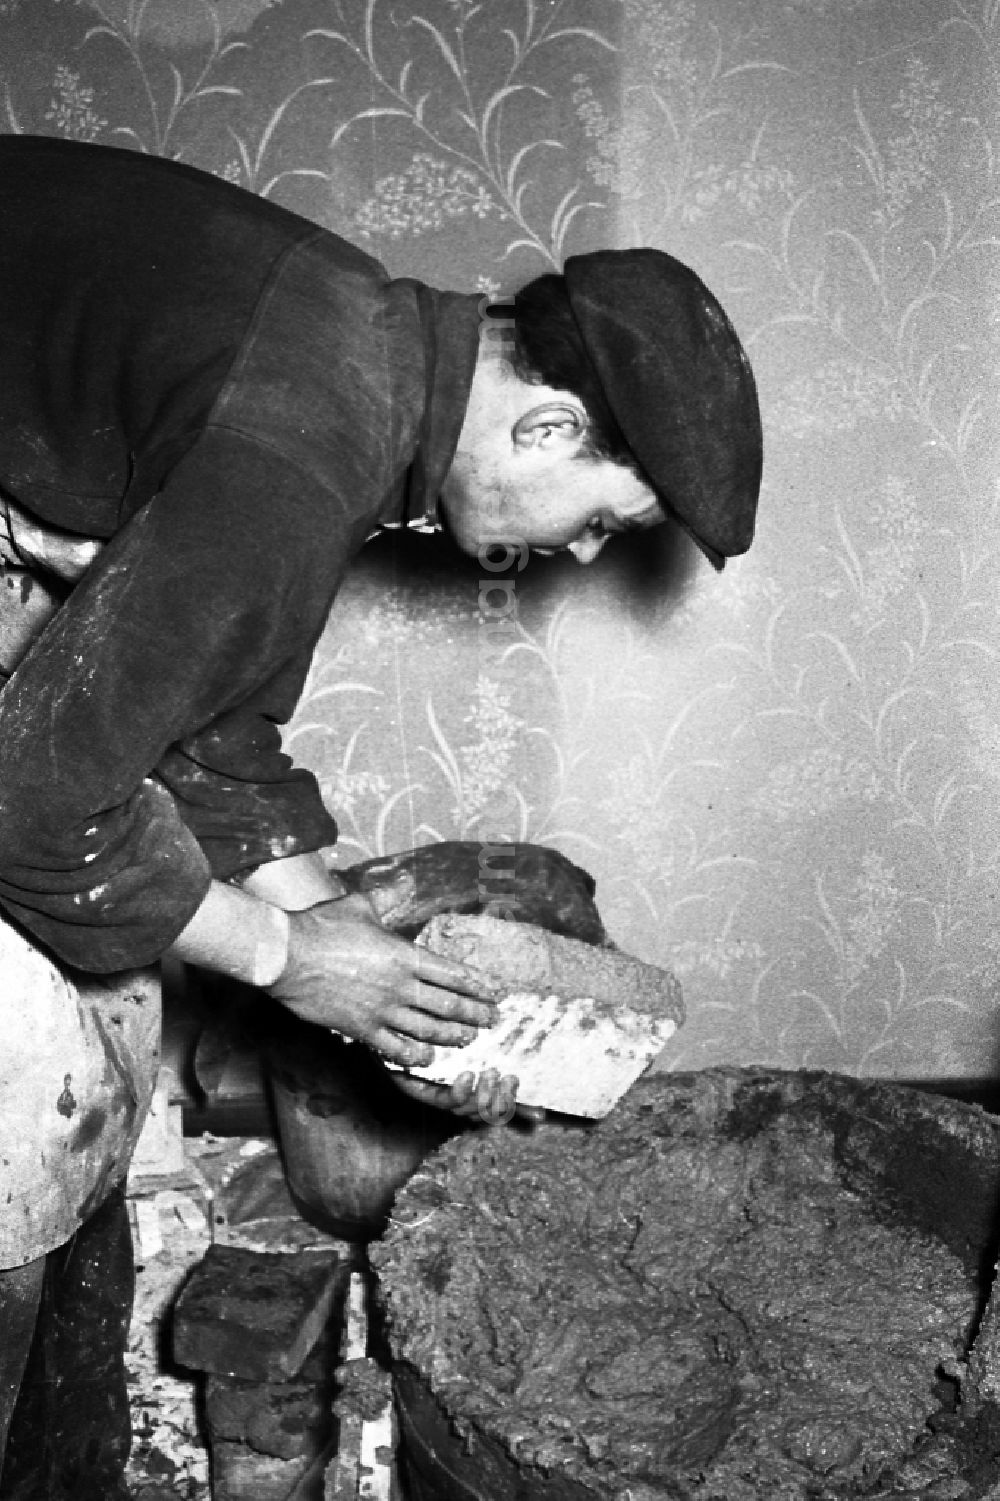 Zschopau: A stove farmer stove fitter puts a tiled stove in a flat in Zschopau in the federal state Saxony in the area of the former GDR, German democratic republic